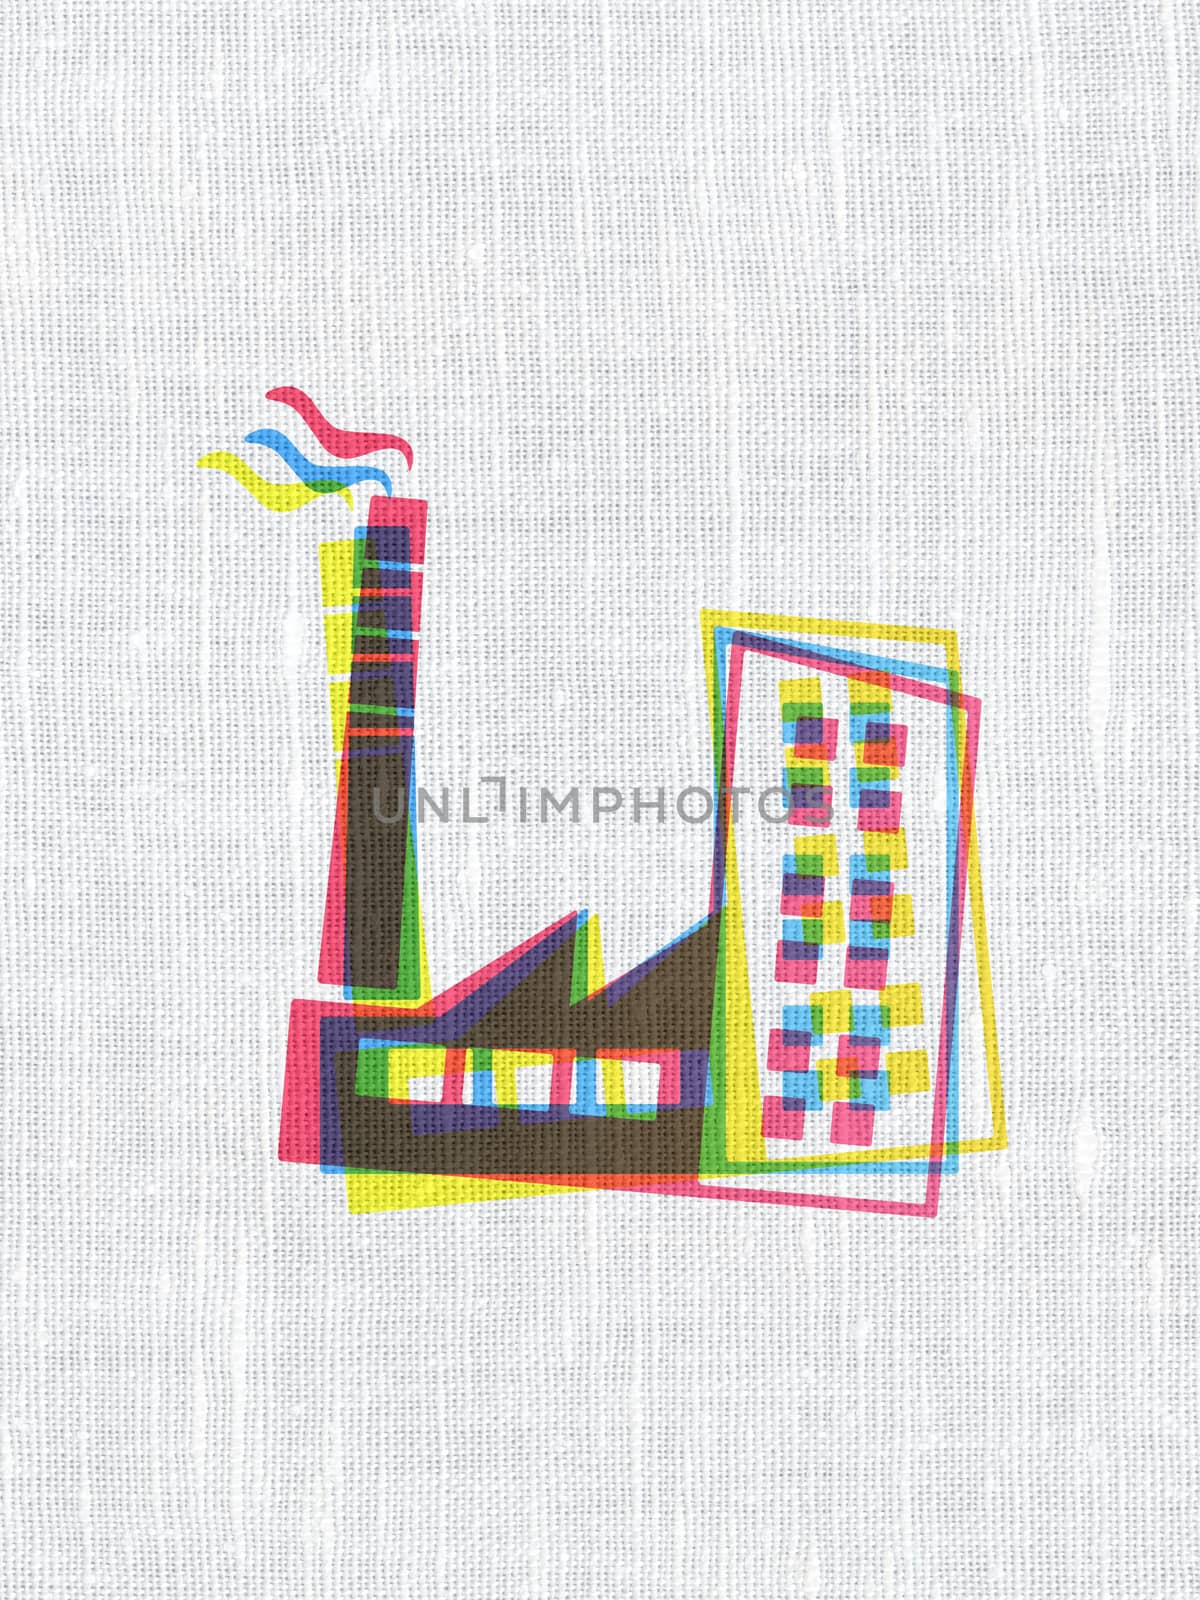 Industry concept: CMYK Industry Building on linen fabric texture background